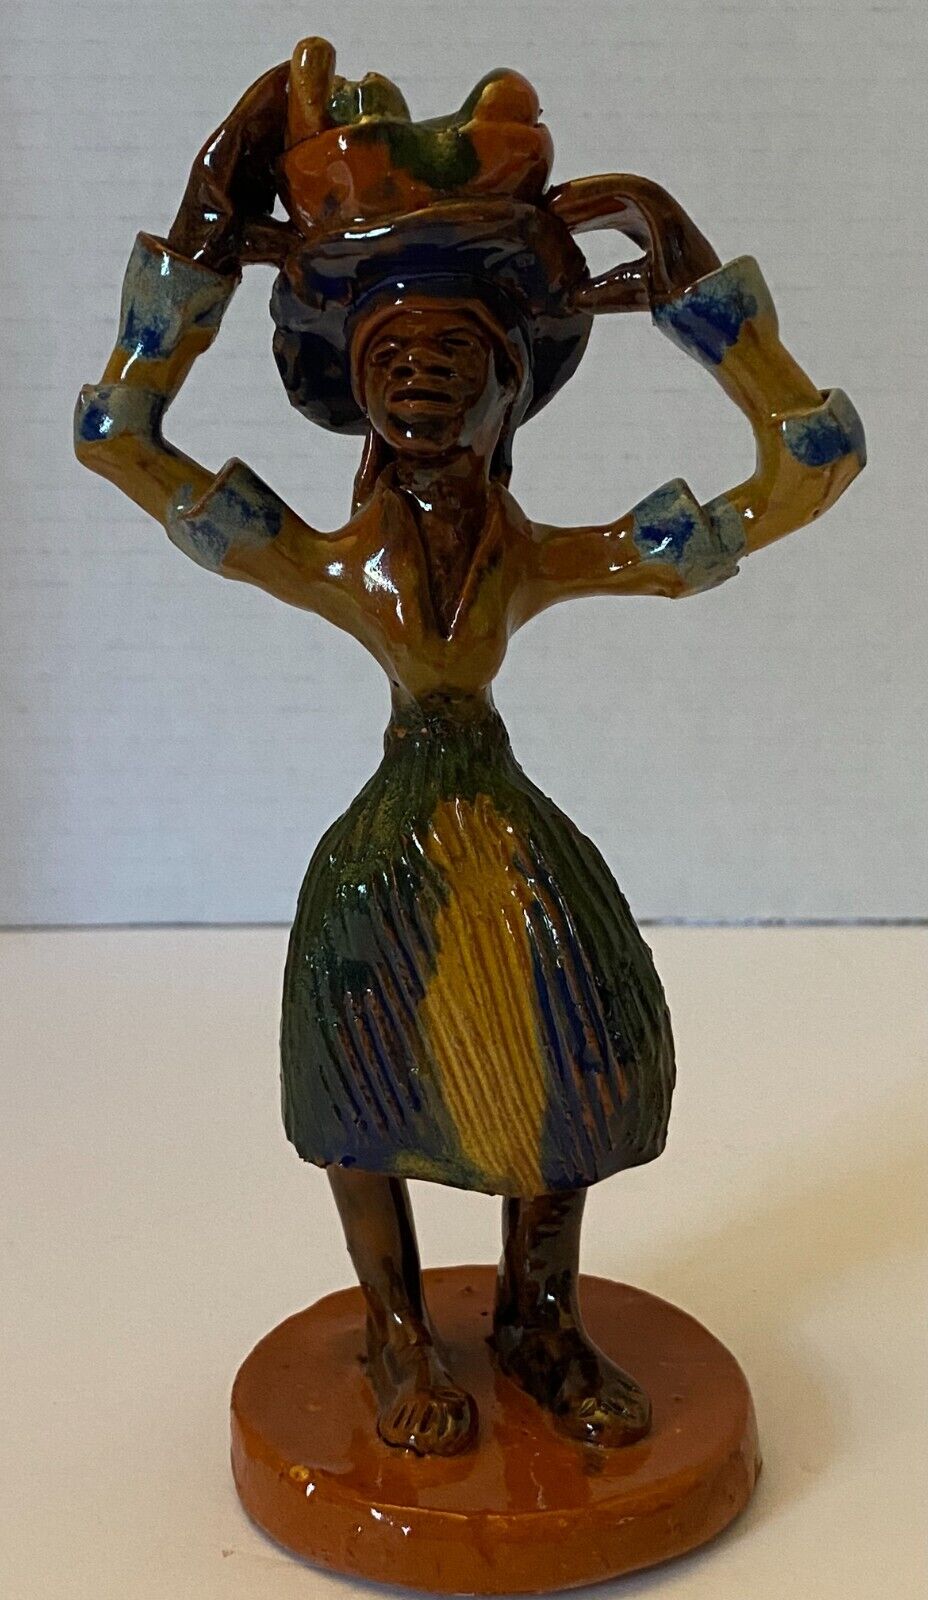 Vintage Red Clay Jamaican Lady W/Fruit Basket On Her Head Figurine 6.5” Tall